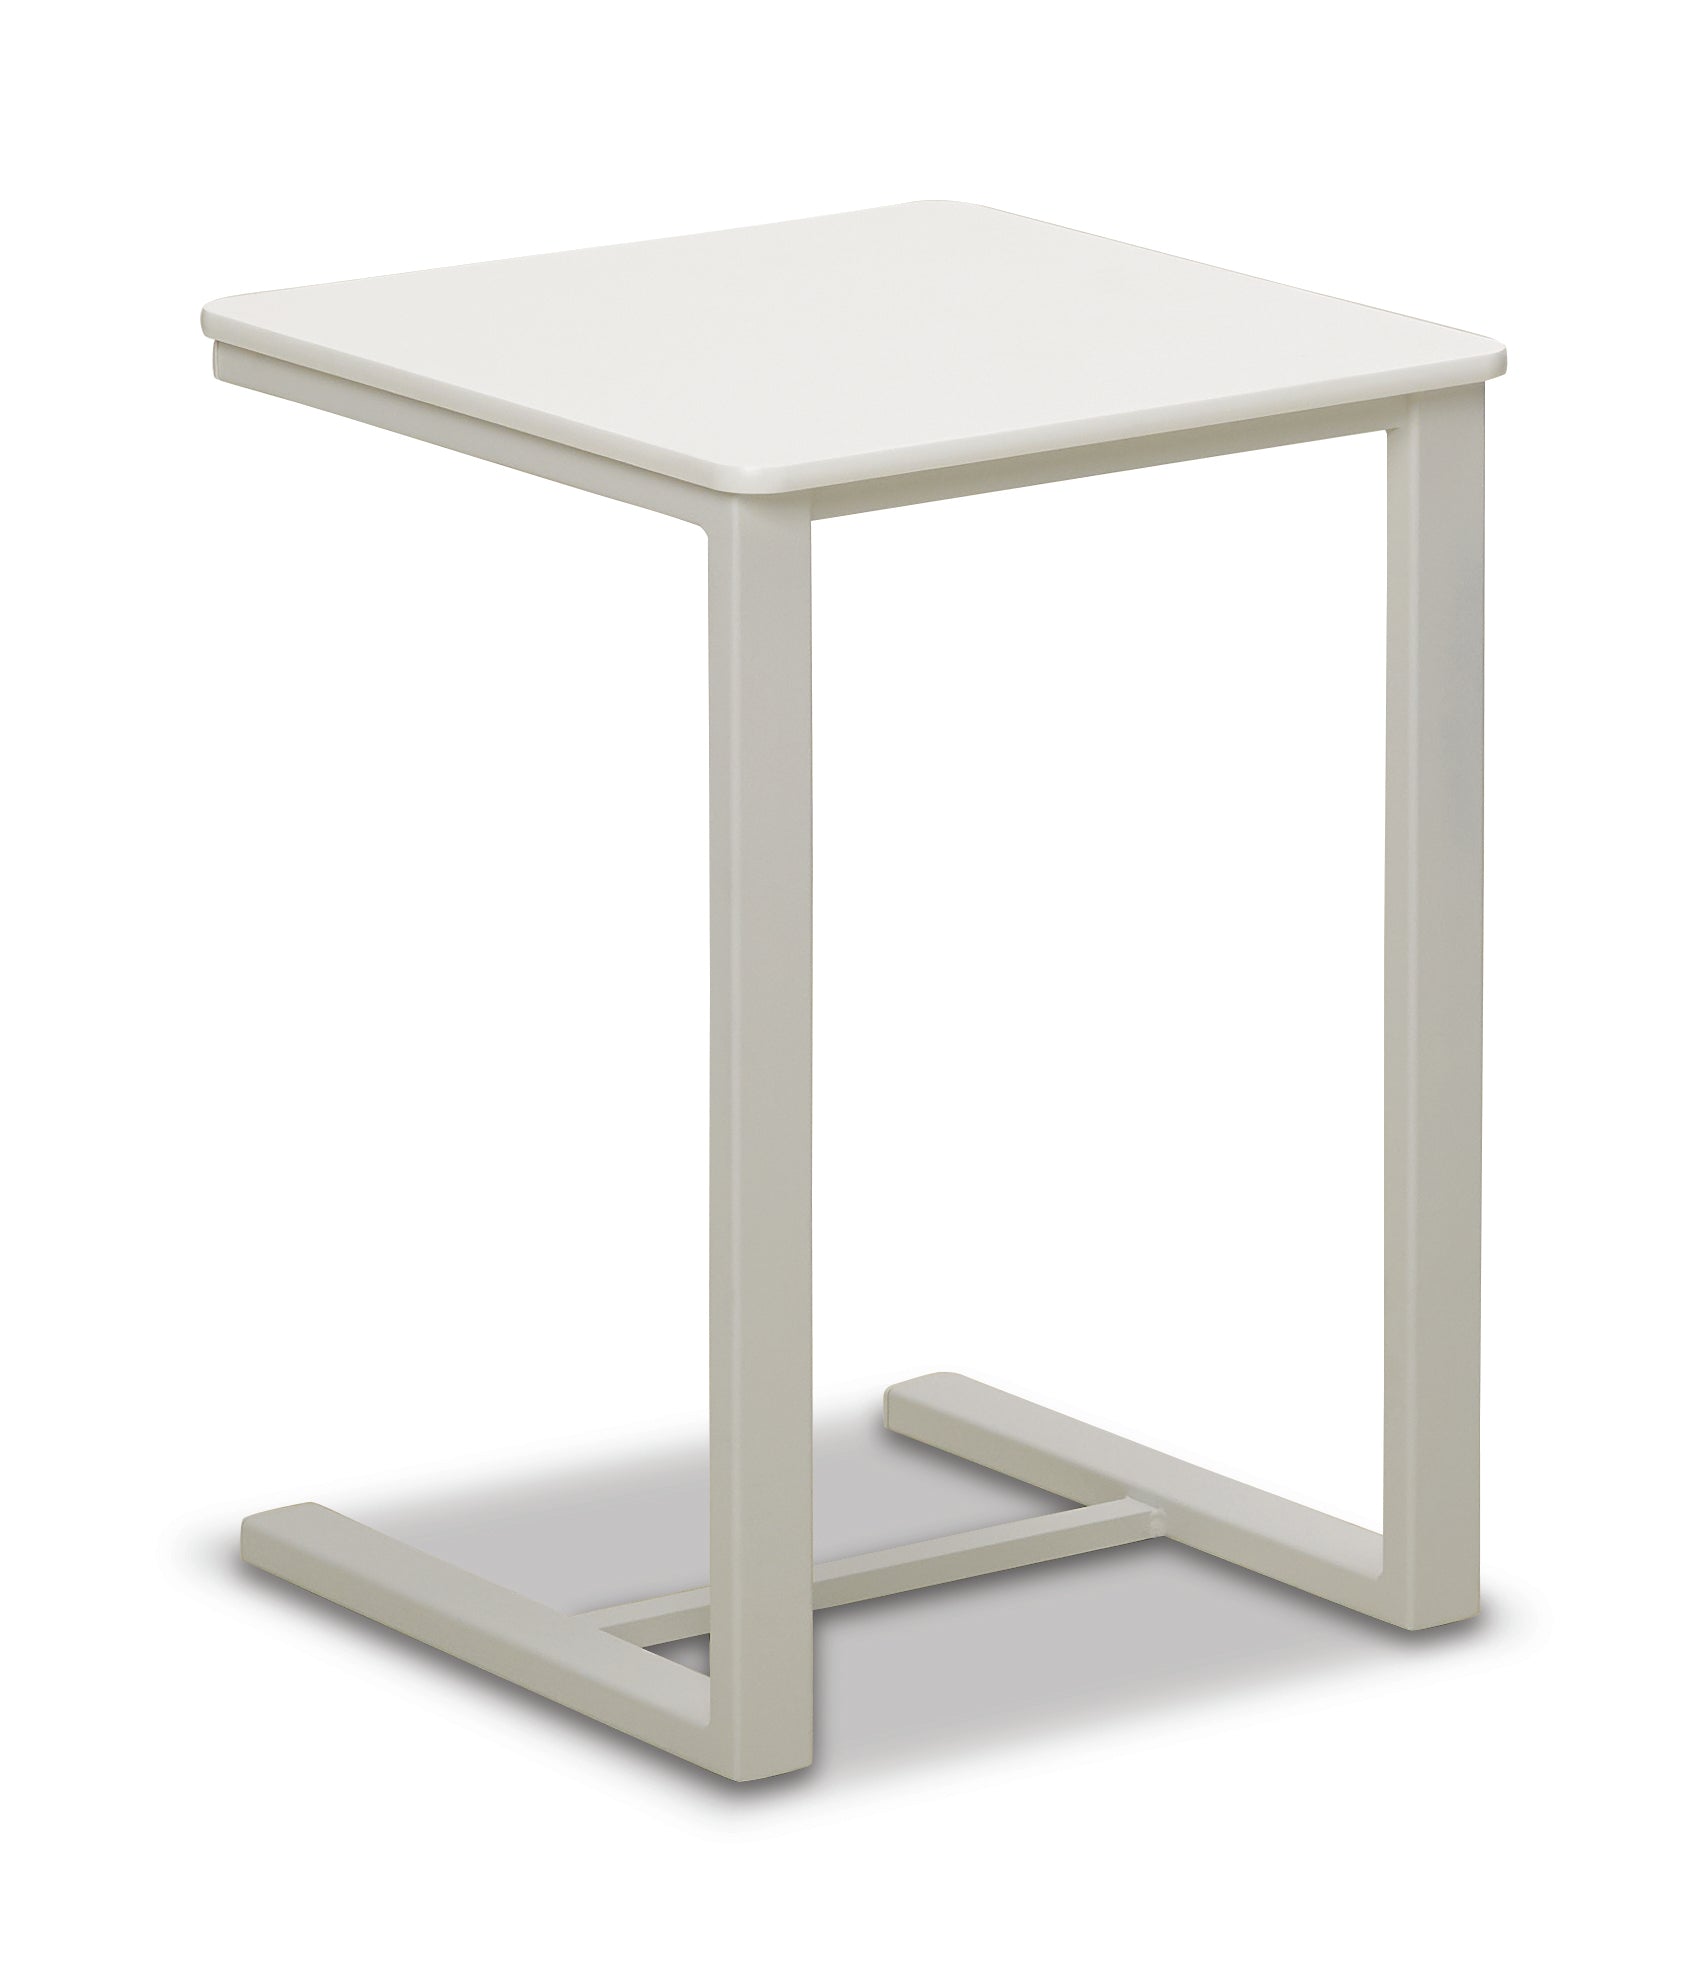 17.5" Square MGP End Table By Telescope